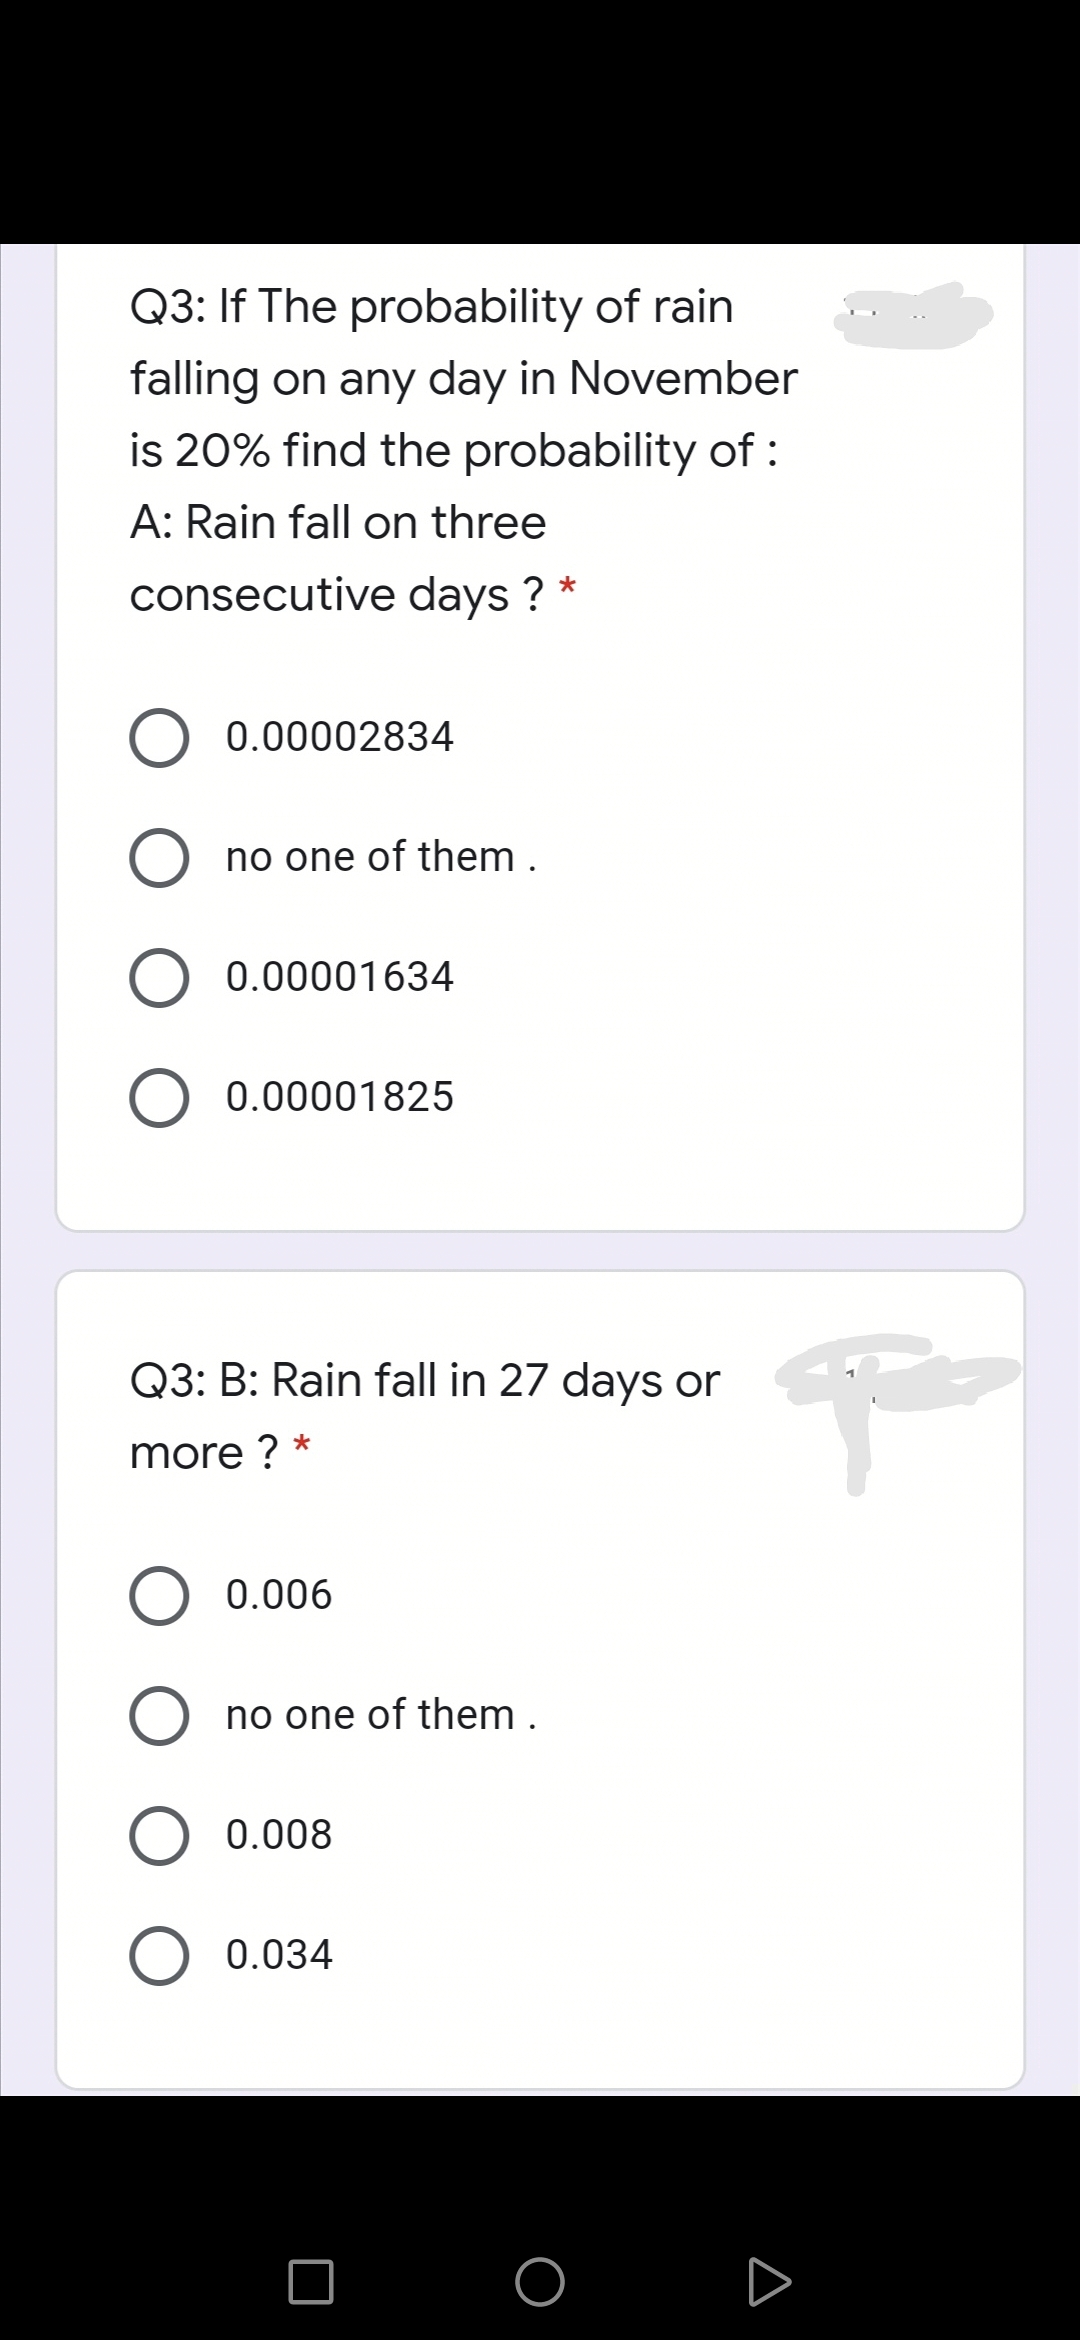 Q3: If The probability of rain
falling on any day in November
is 20% find the probability of :
A: Rain fall on three
consecutive days ?
*
0.00002834
O no one of them .
0.00001634
0.00001825
Q3: B: Rain fall in 27 days or
more ? *
0.006
no one of them .
O 0.008
0.034
O D
